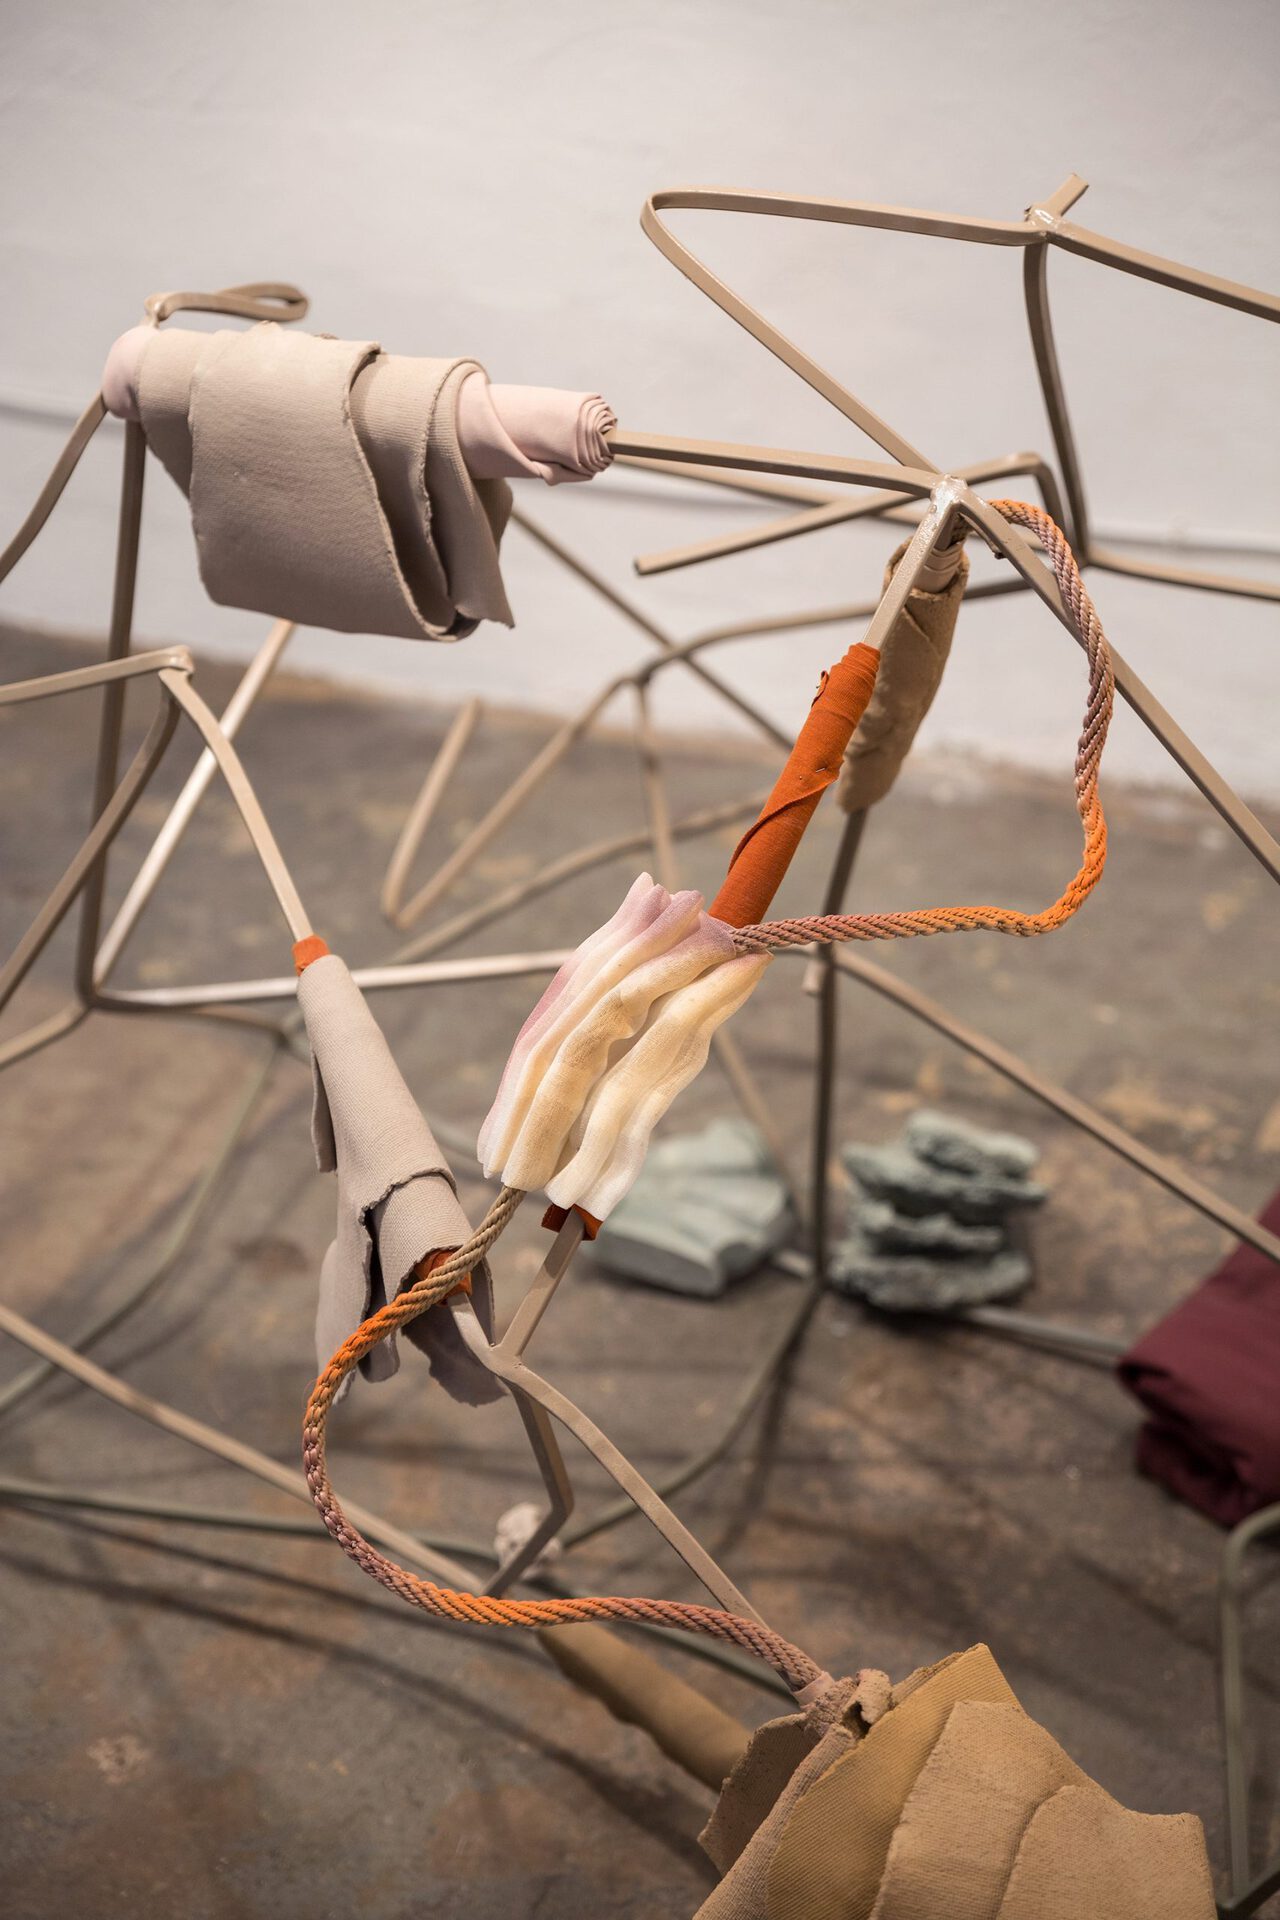 Laura Põld, Downward dog (detail), 2020. Steel, clay, found objects, rope, spray paint